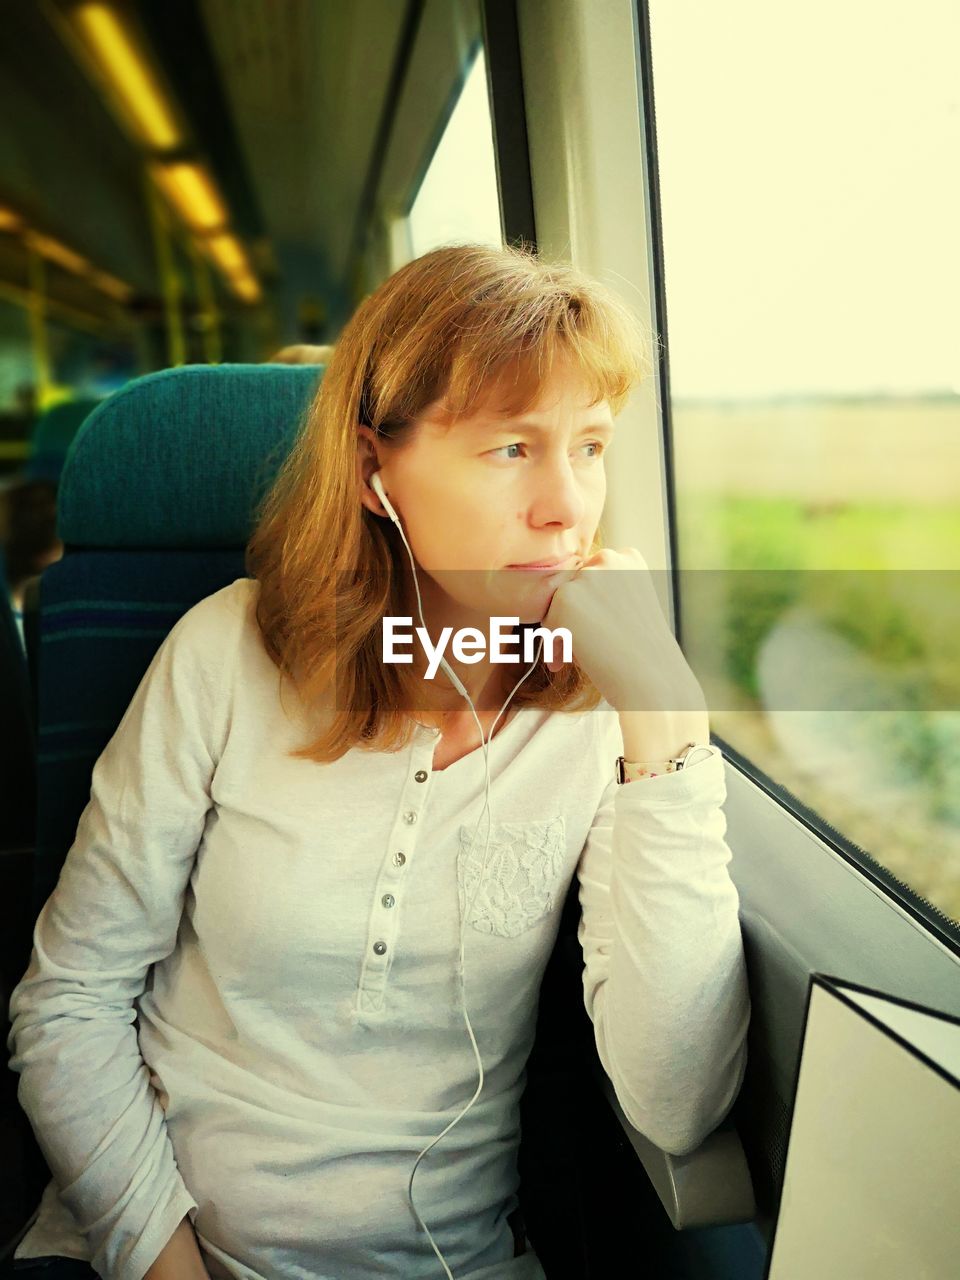 Woman looking through window while traveling in train